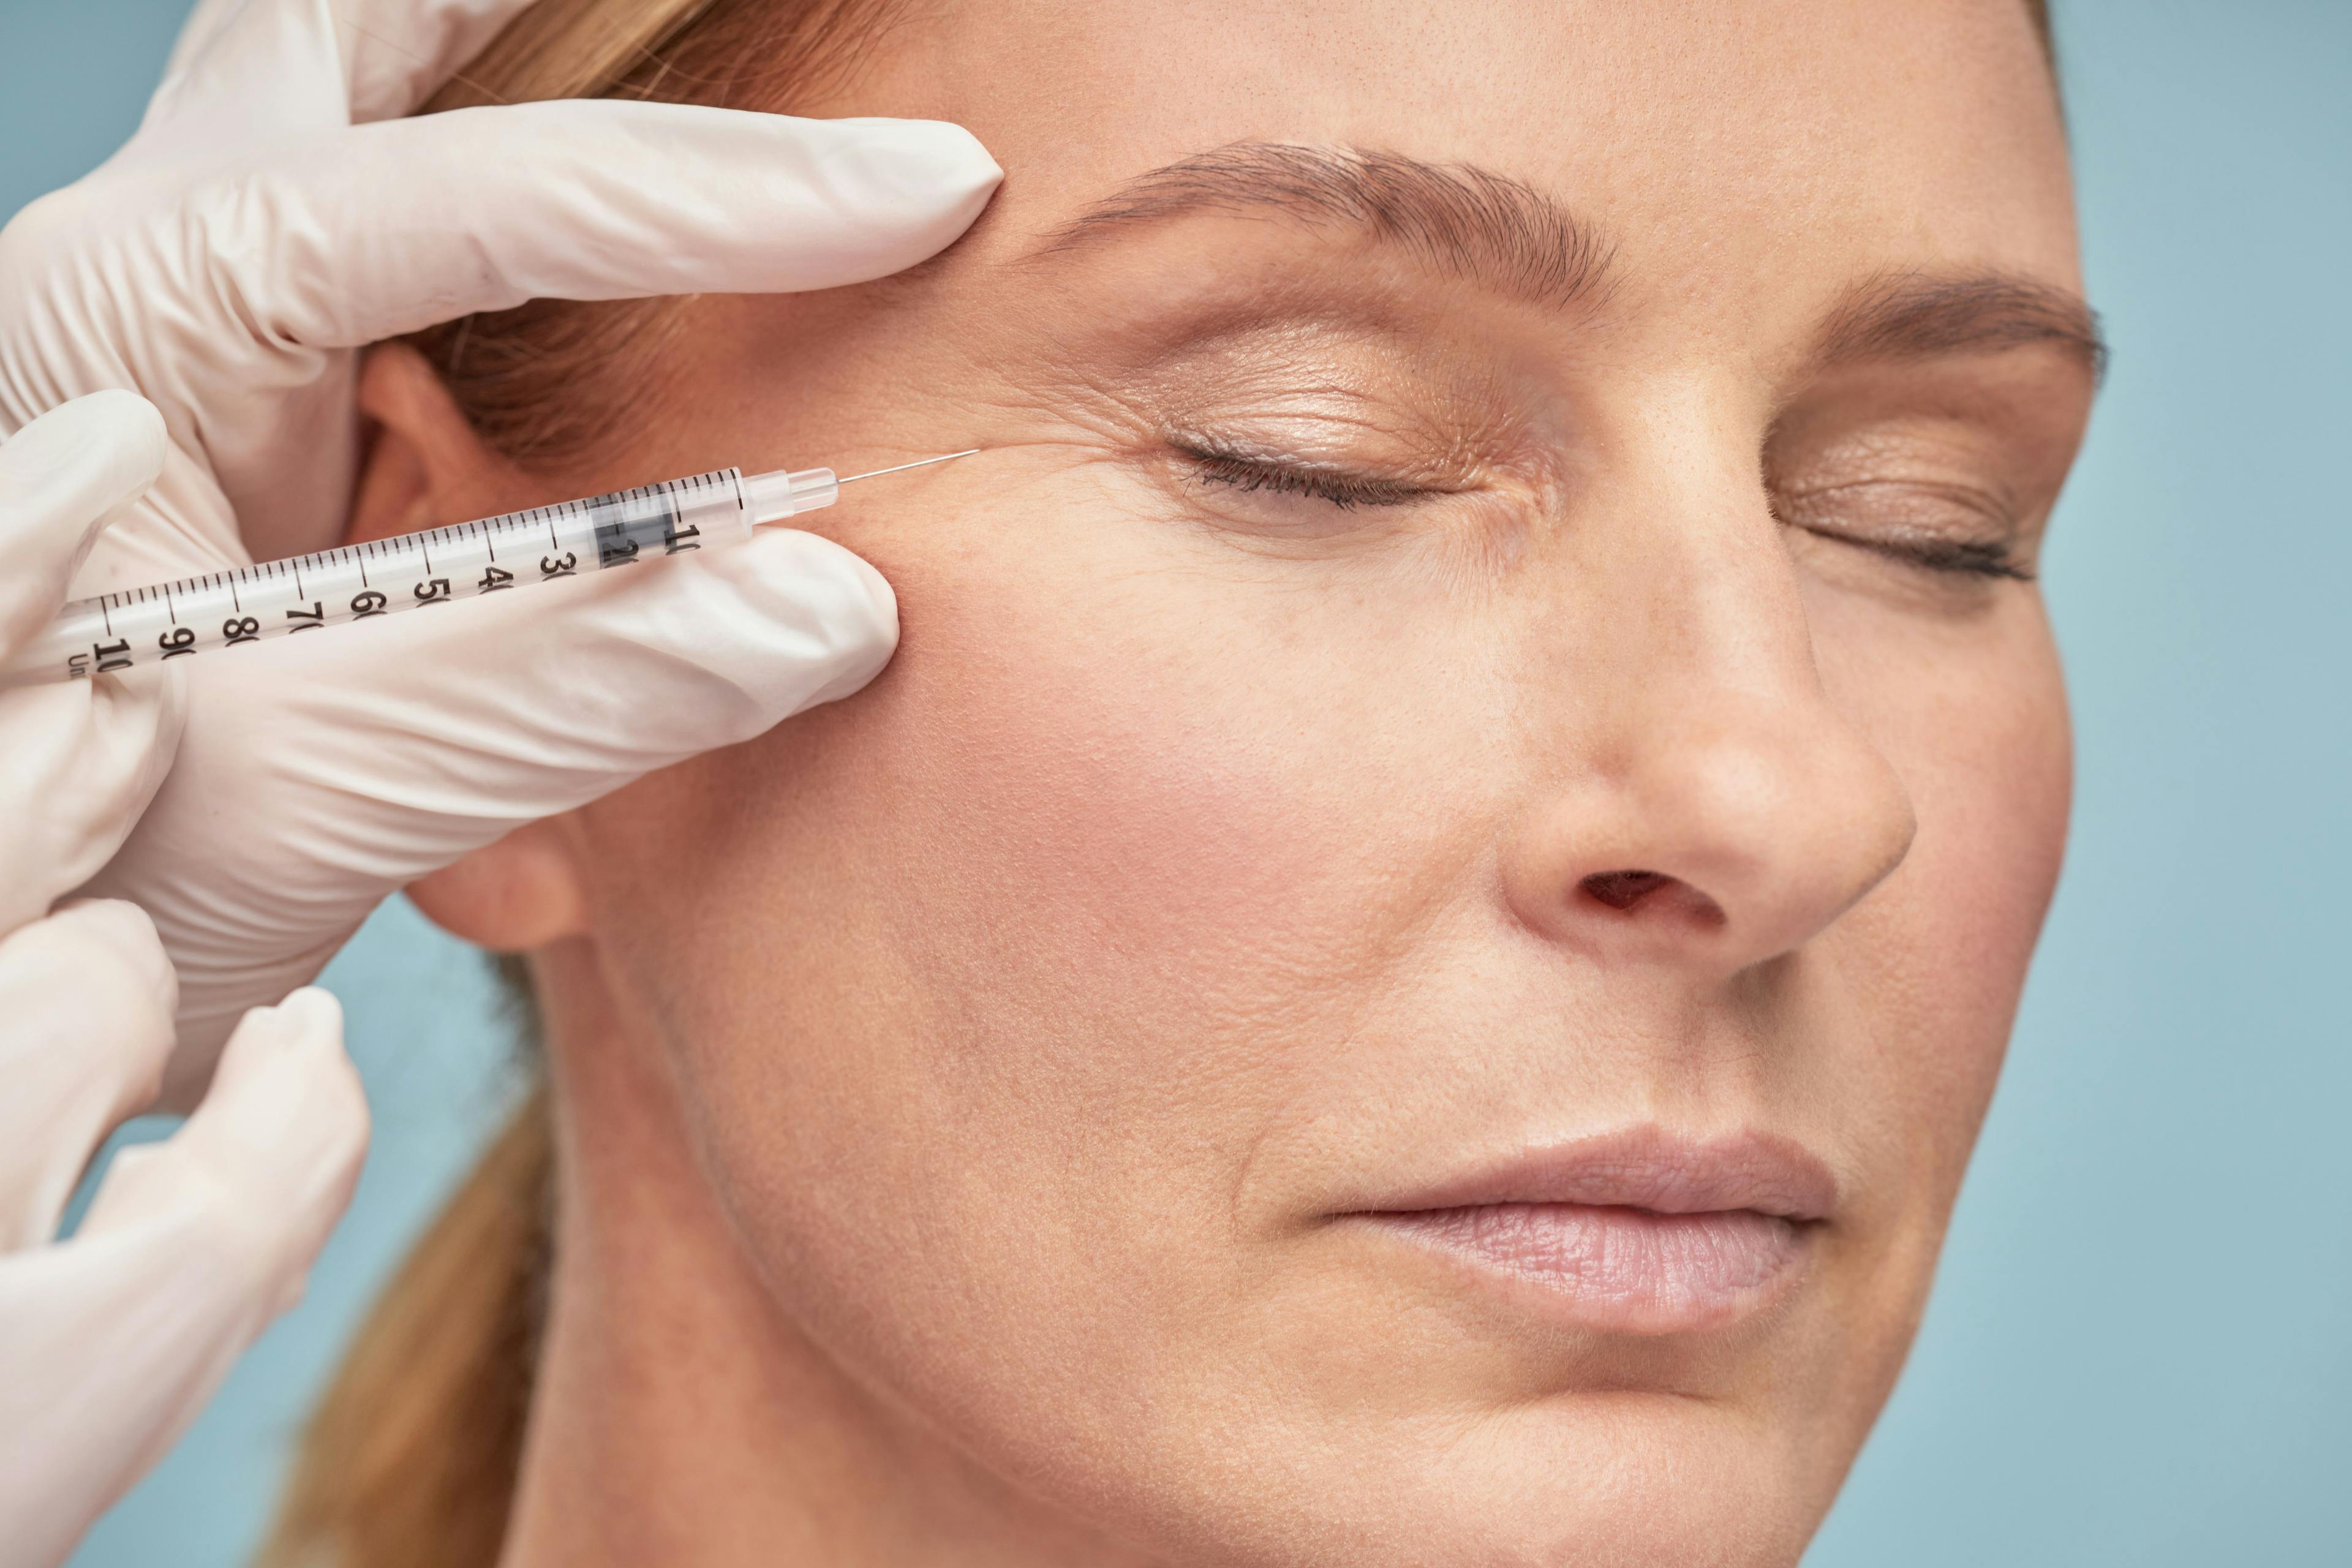 Hyaluronic Acid-Based Fillers Effective in Treating Signs of Aging